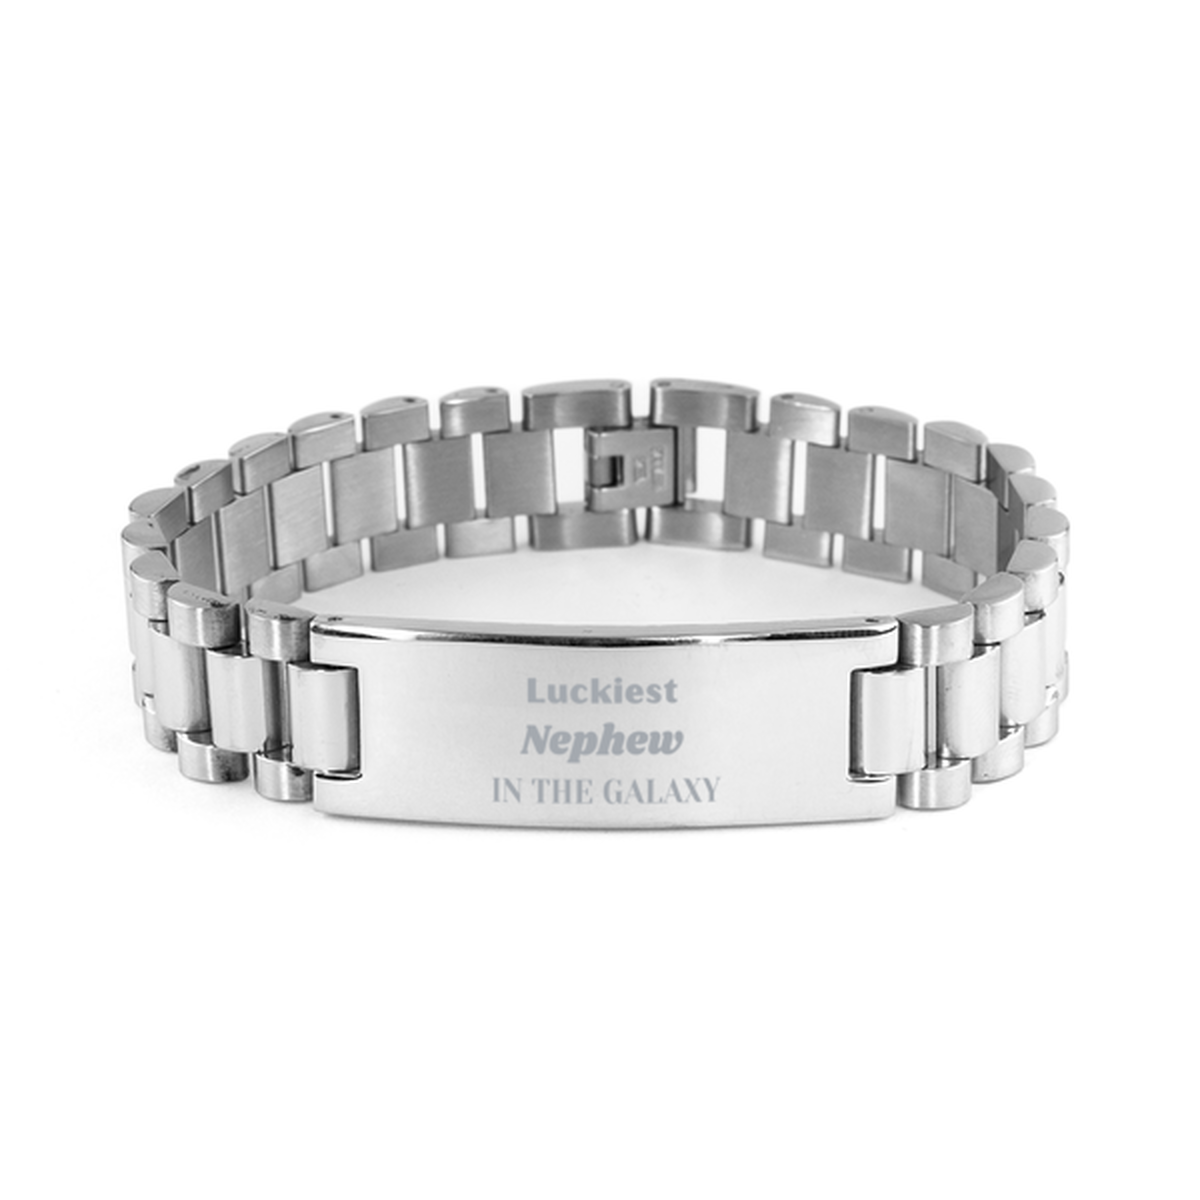 Luckiest Nephew in the Galaxy, To My Nephew Engraved Gifts, Christmas Nephew Ladder Stainless Steel Bracelet Gifts, X-mas Birthday Unique Gifts For Nephew Men Women